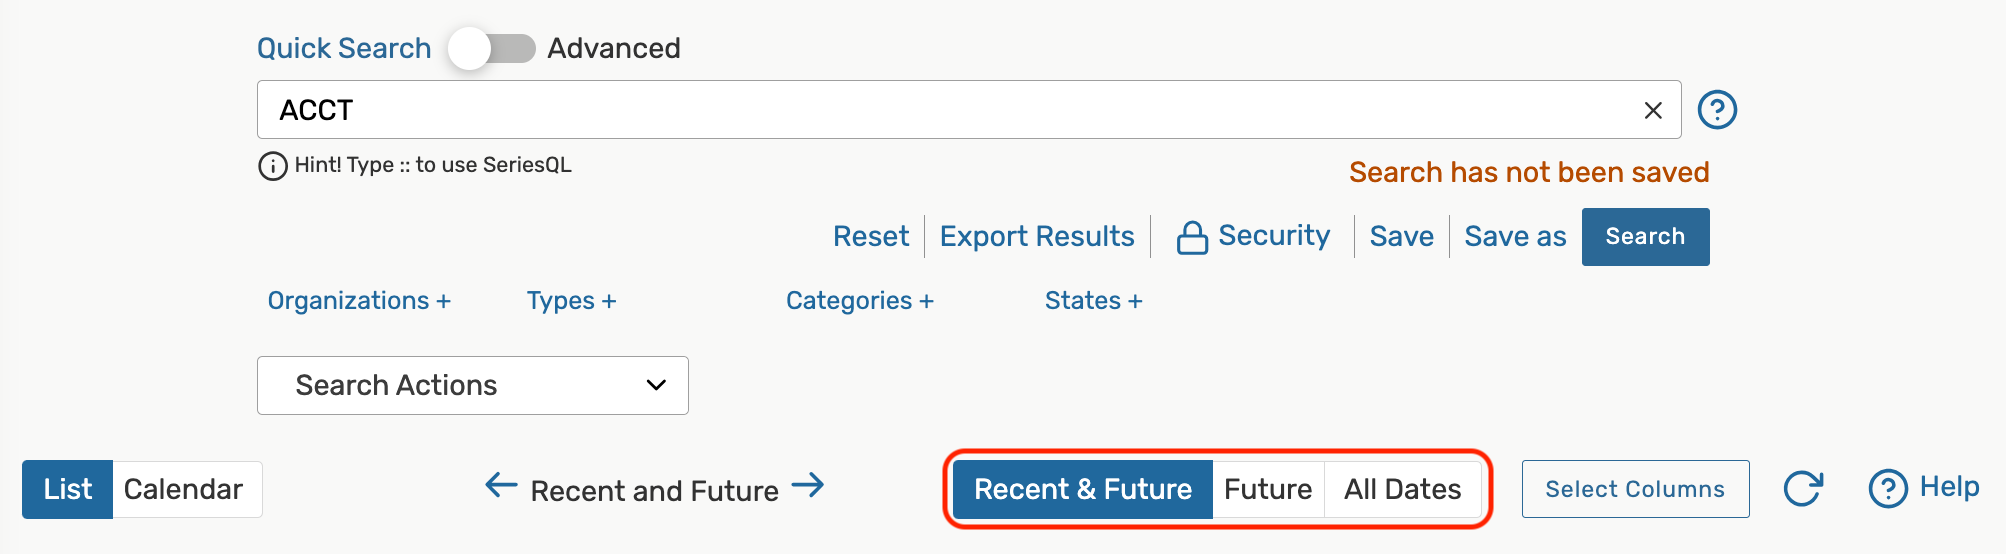 Recent and future, future, and all dates buttons above the quick search results